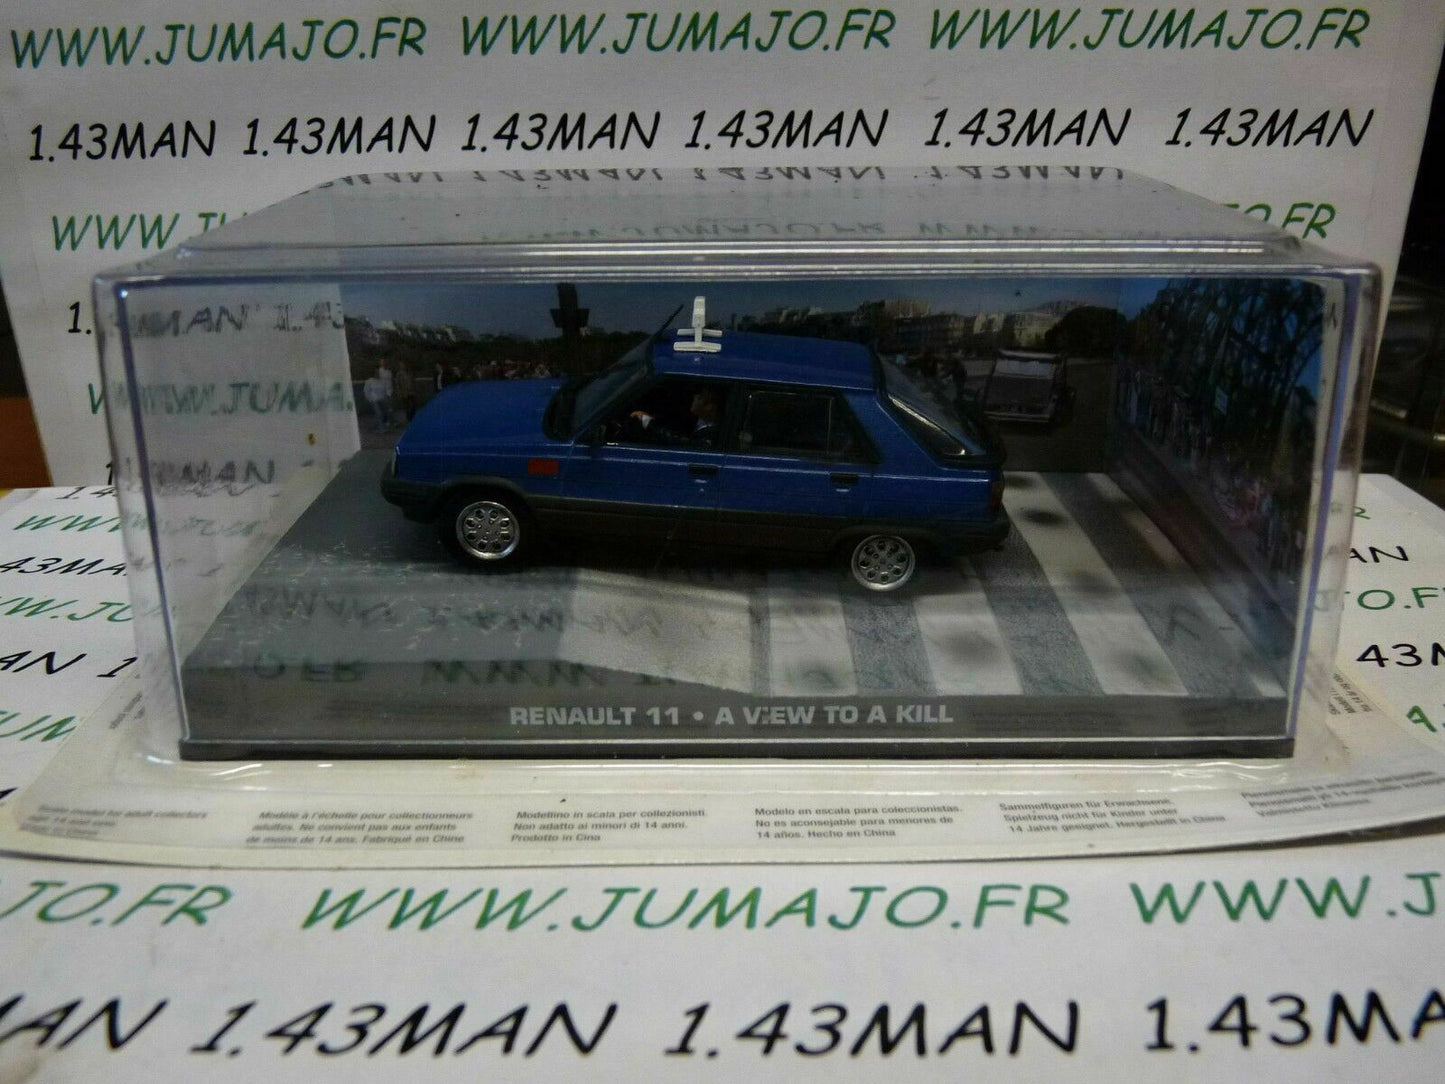 JB53 voiture 1/43 IXO 007 JAMES BOND Renault 11 taxi a view to kill